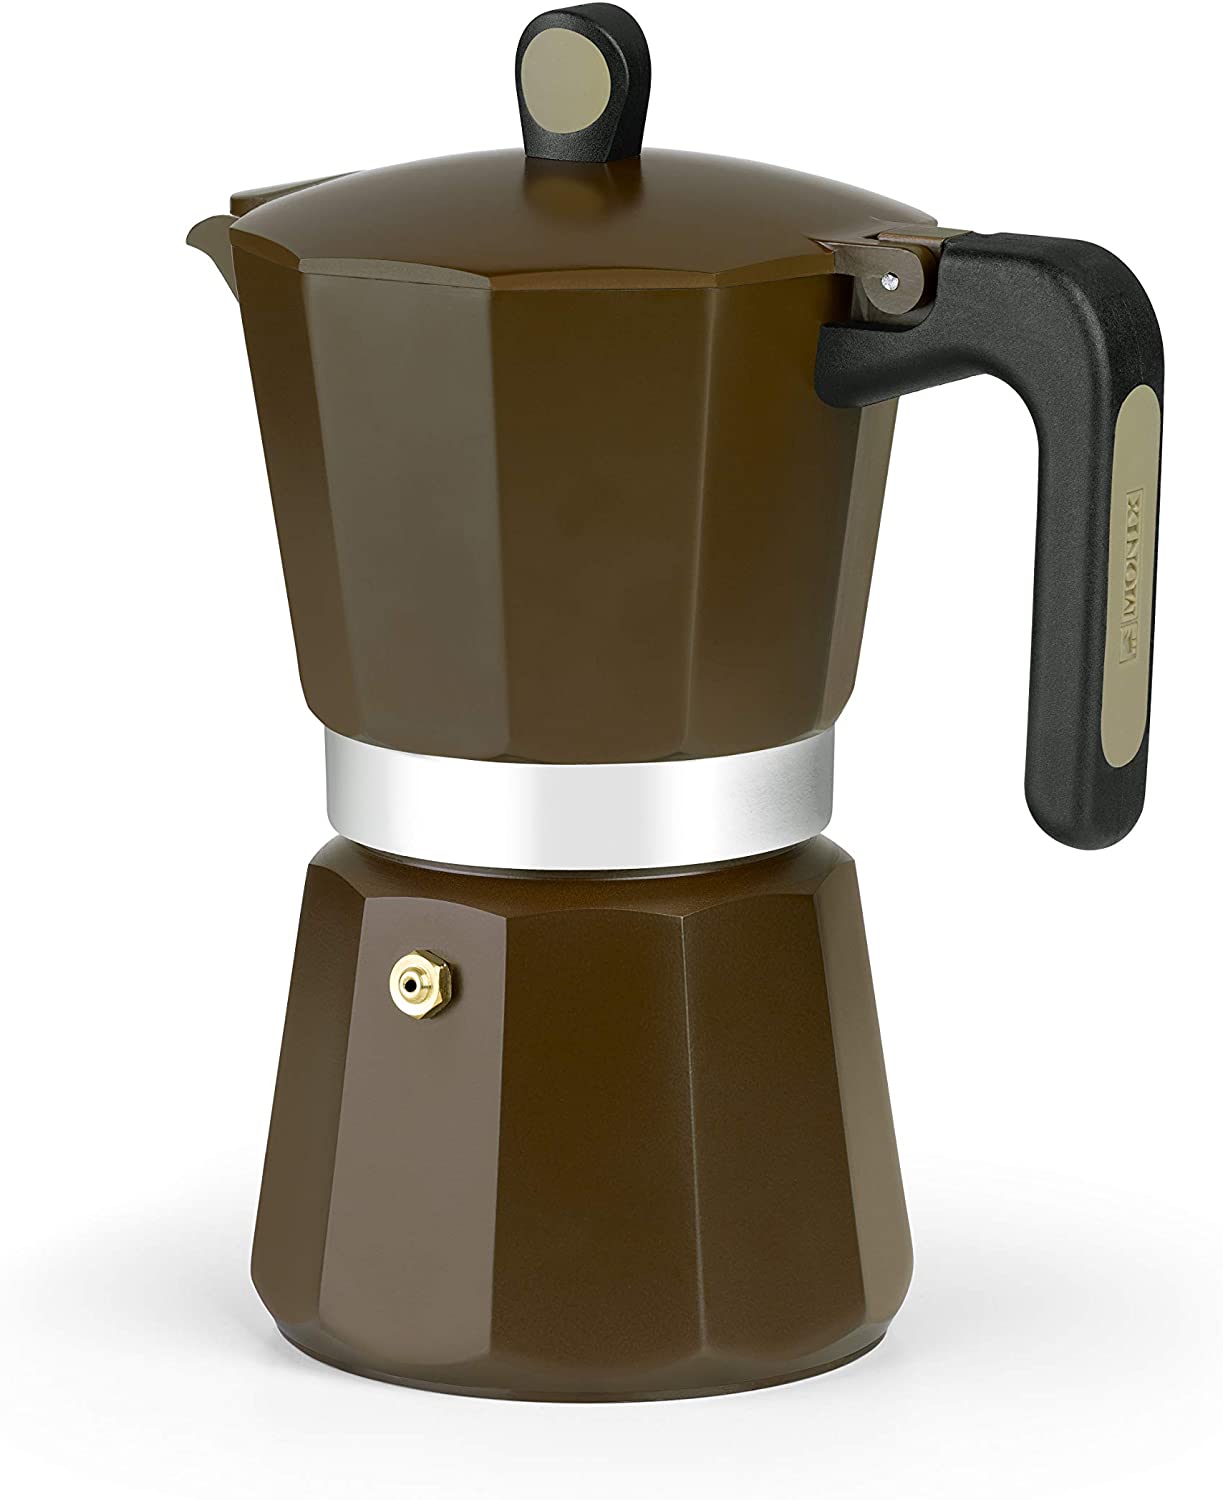 Monix New Cream Italian Aluminium Coffee Maker - 6 Cup Capacity - Suitable for All Heat Sources Including Induction